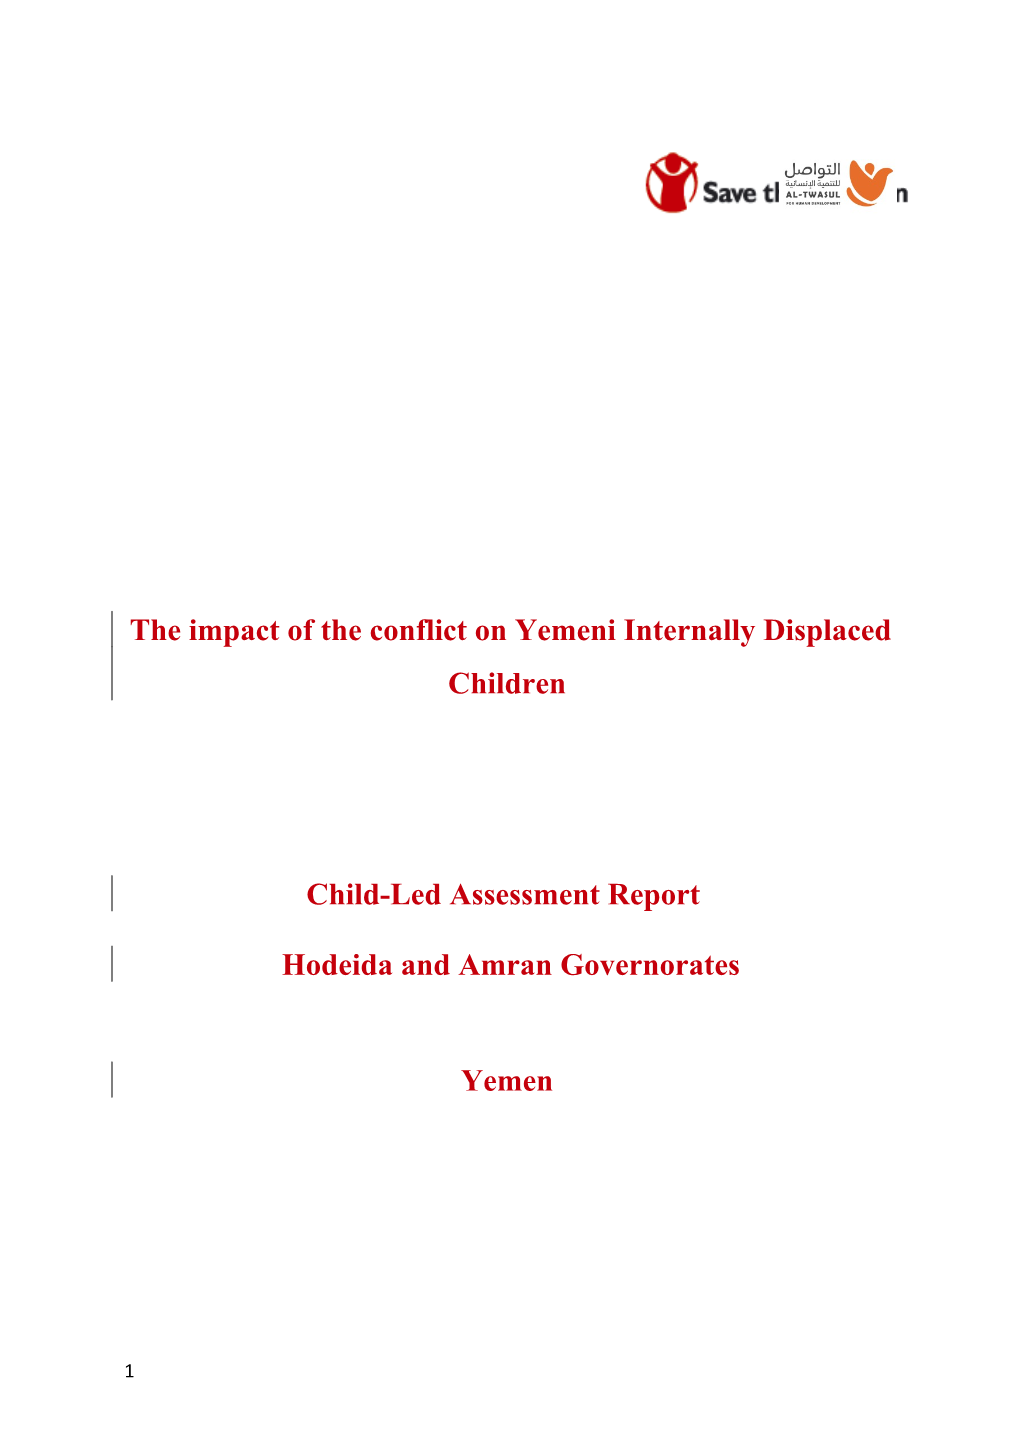 The Impact of the Conflict on Yemeni Internally Displaced Children